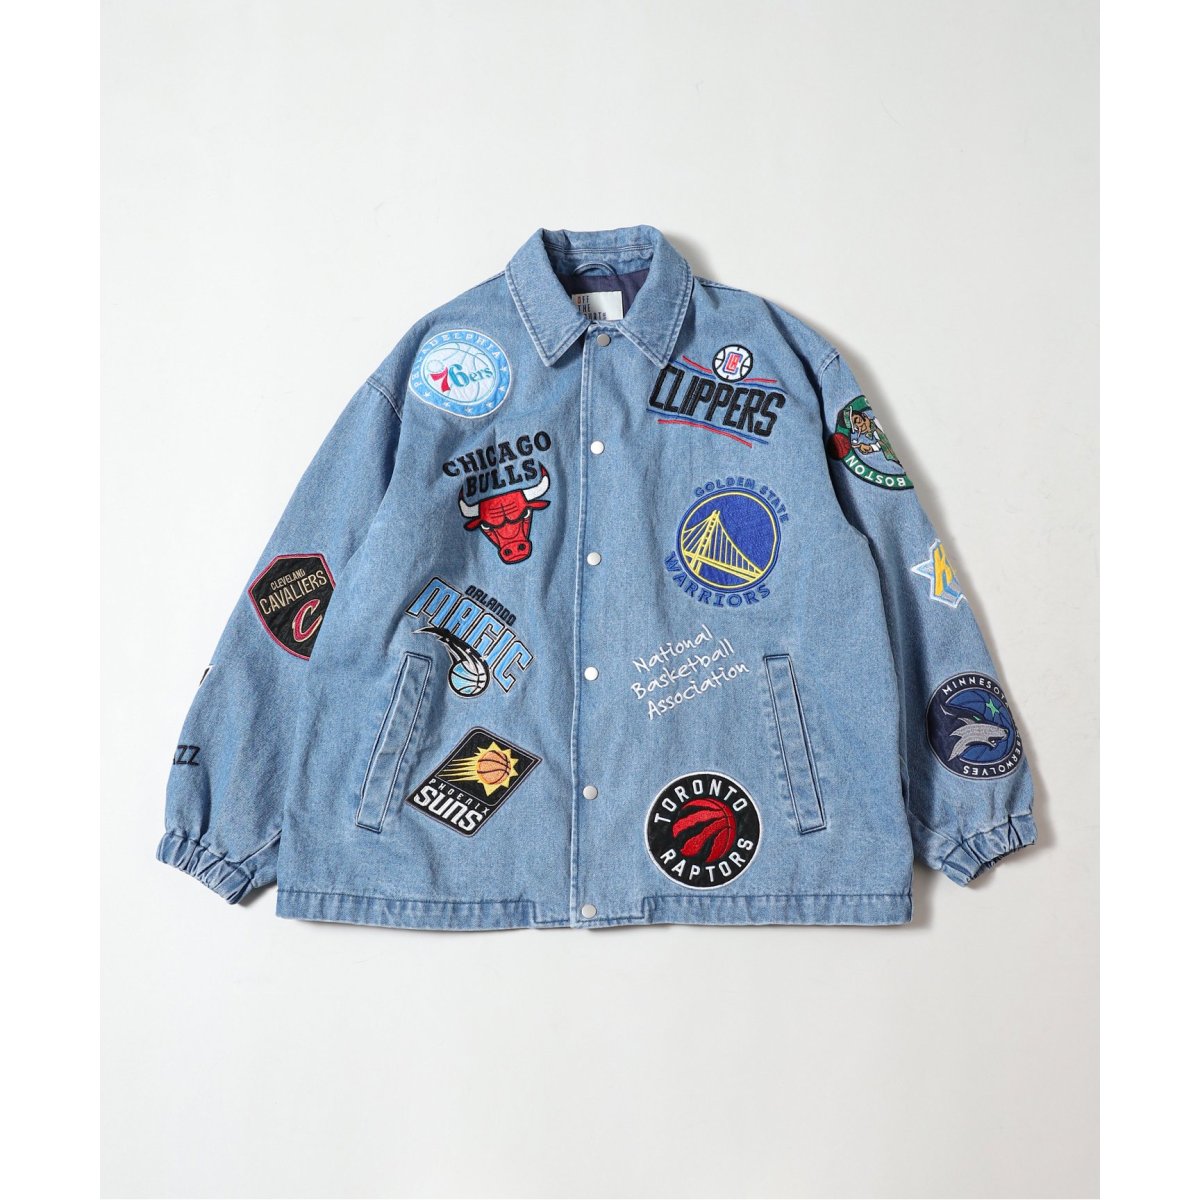 Off The Court by NBA】Denim Jacket | ジャーナルスタンダード